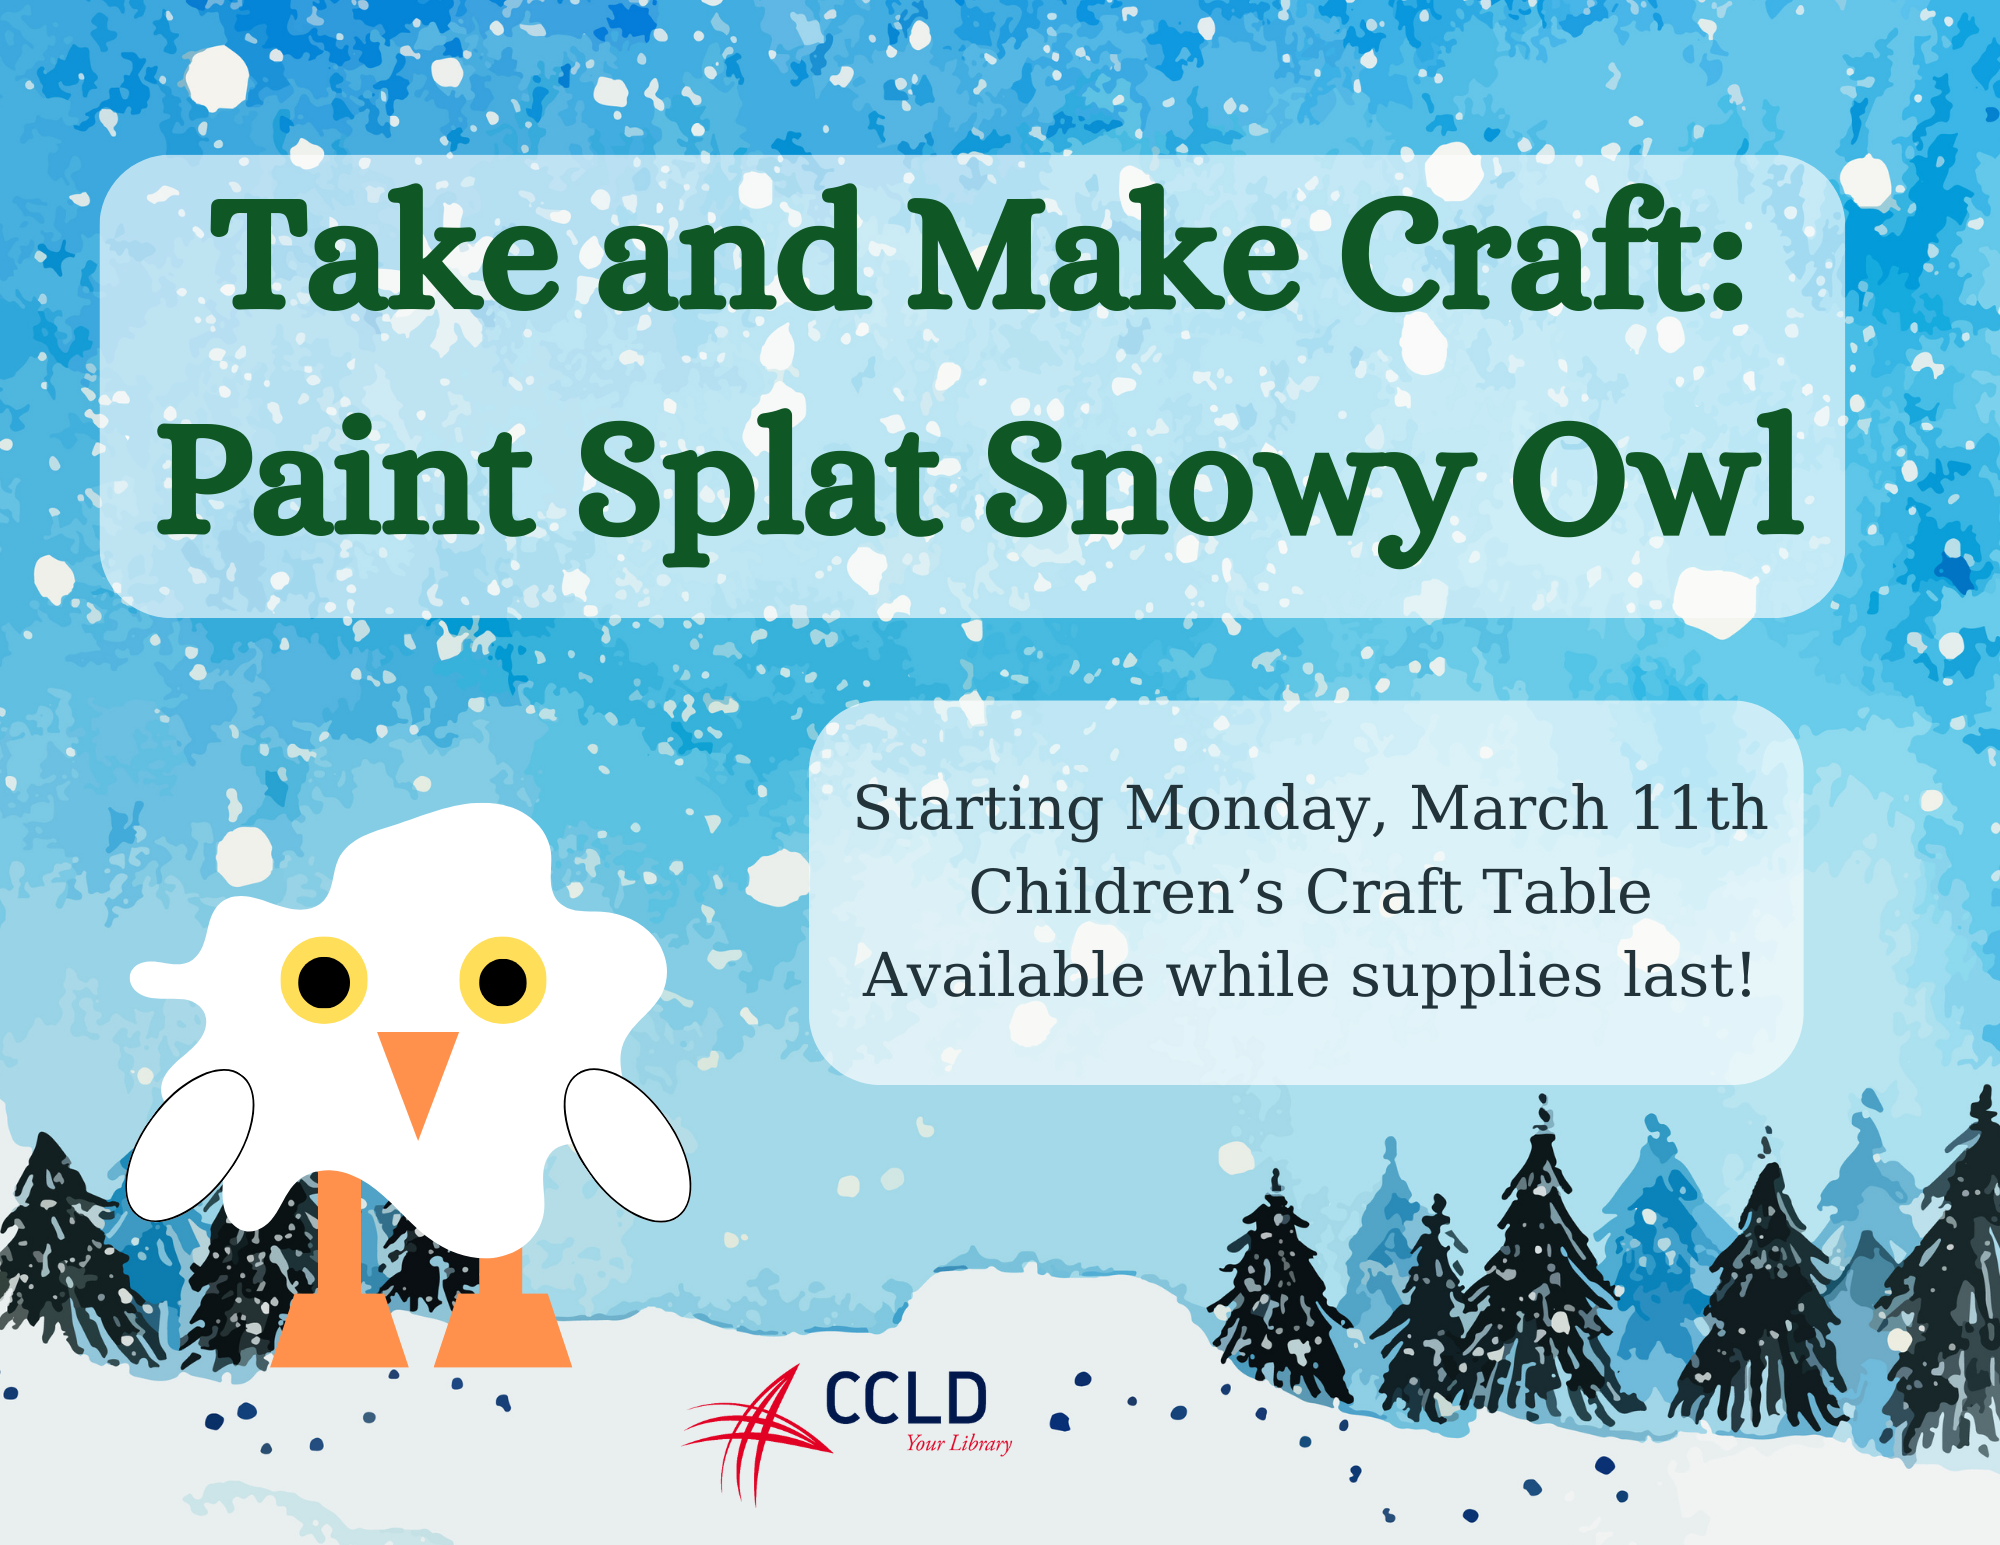 Make your own snowy owl painting! Pick up your kit in the Steele Children's Department starting March 11th. Available while supplies last!